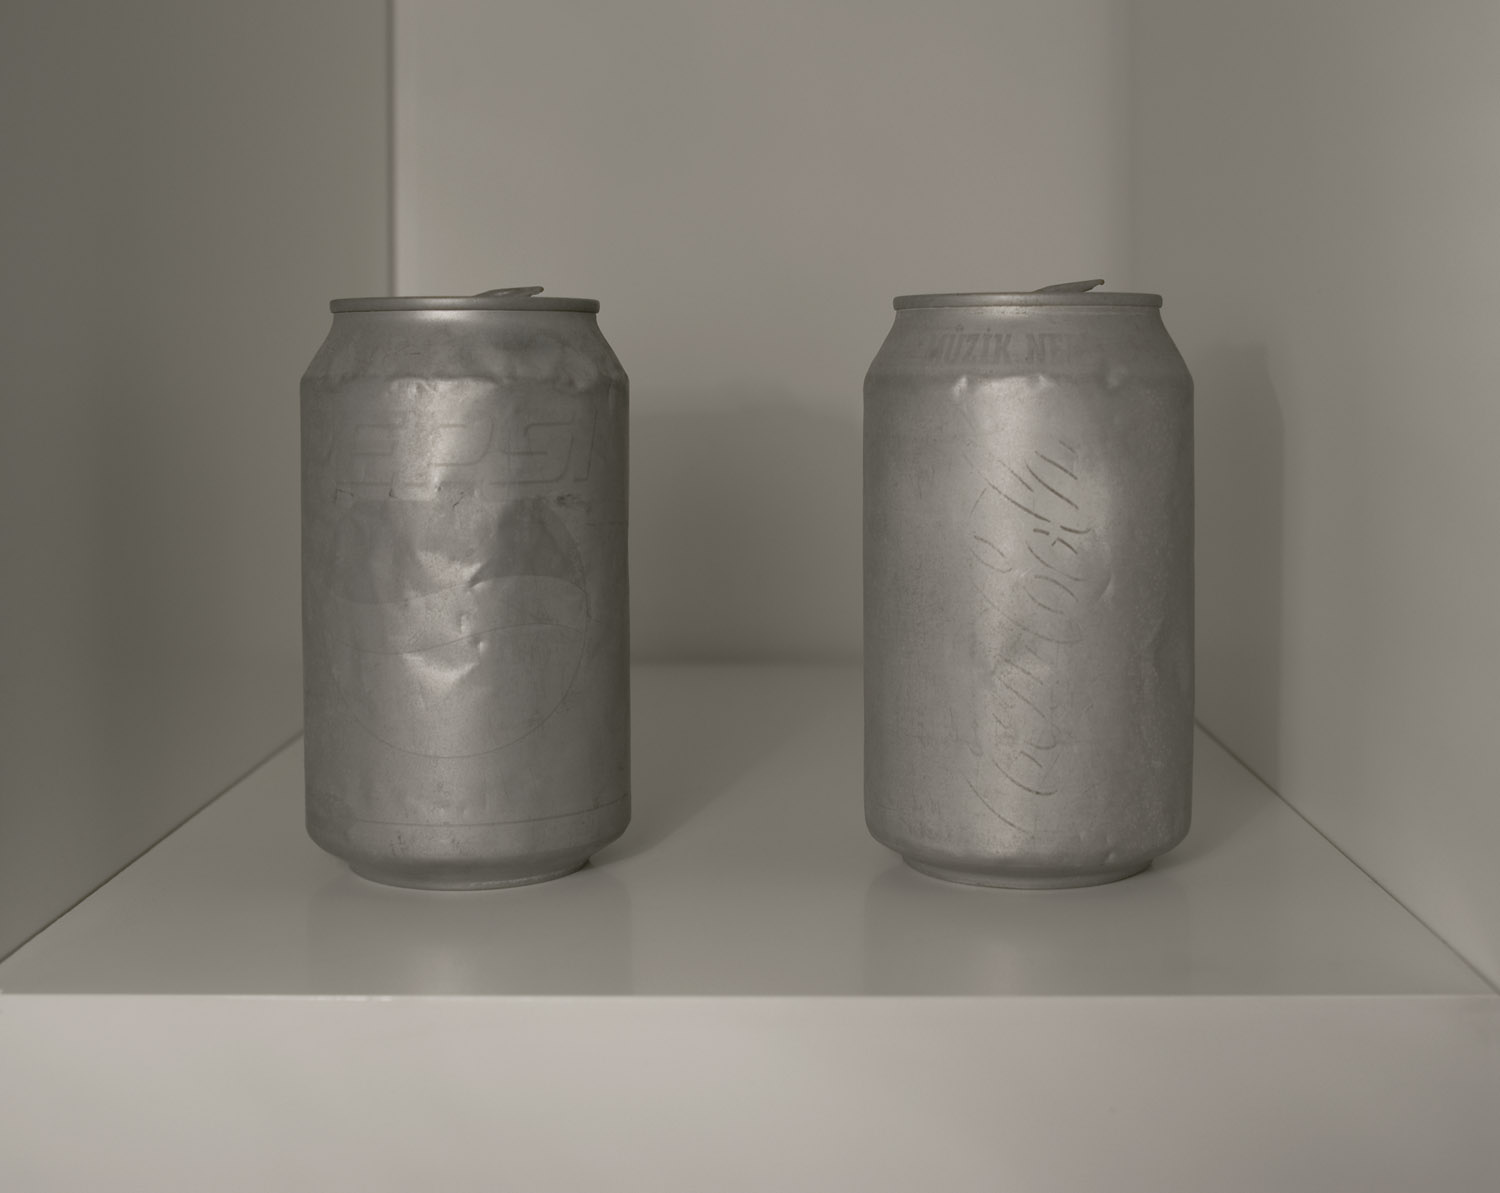 Already Made 1 (Cans), 2007. Digital print backed with aluminum.